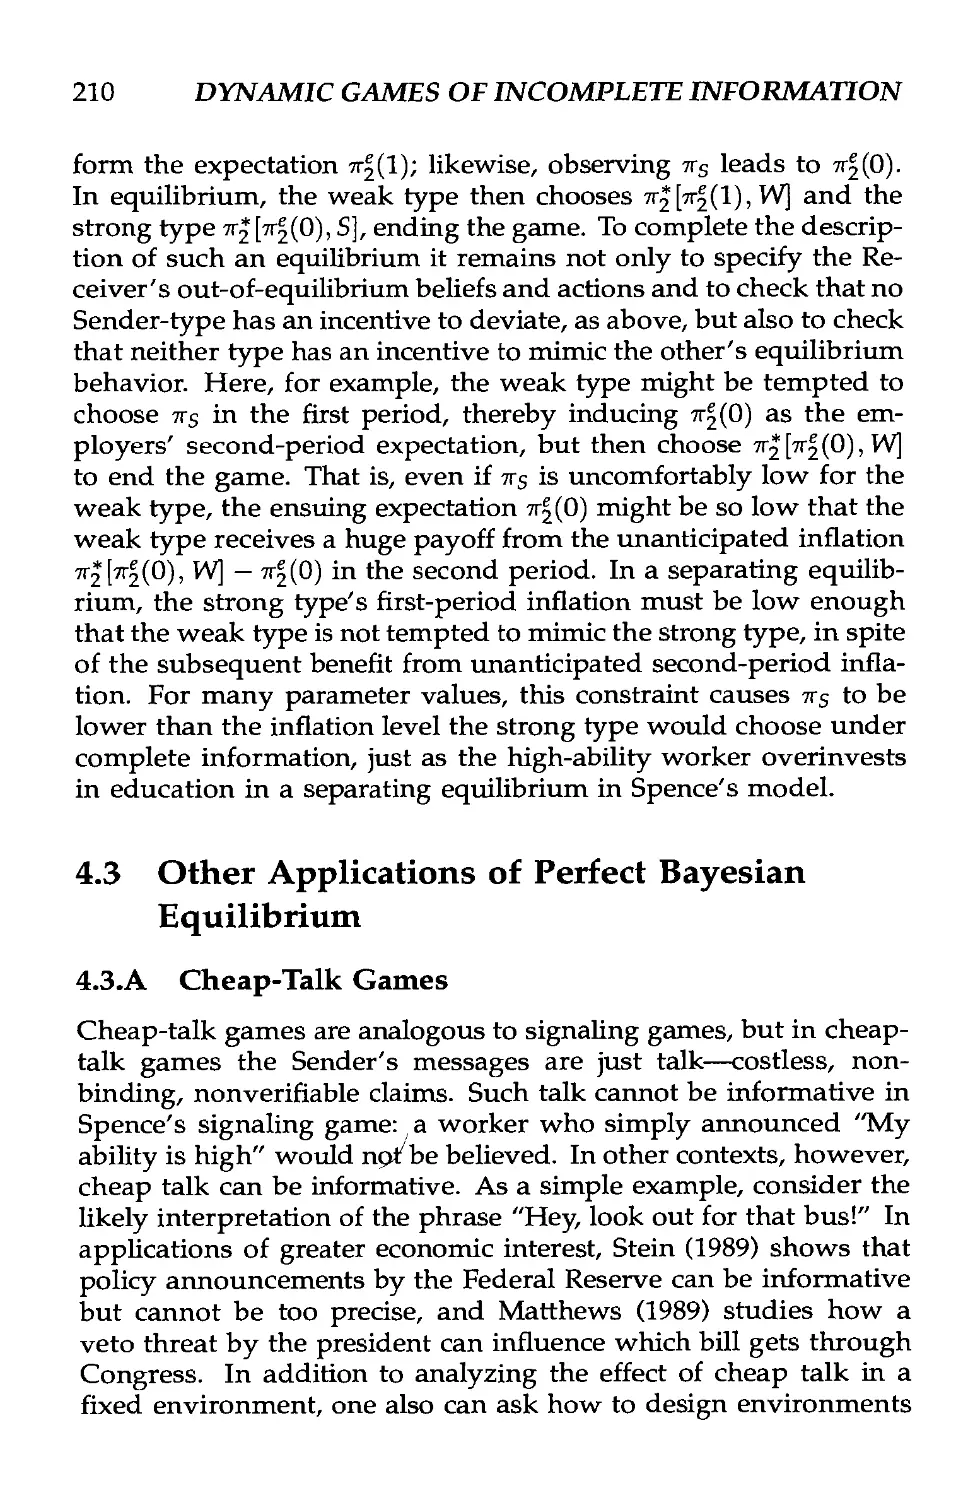 4.3 Other Applications of Perfect Bayesian Equilibrium